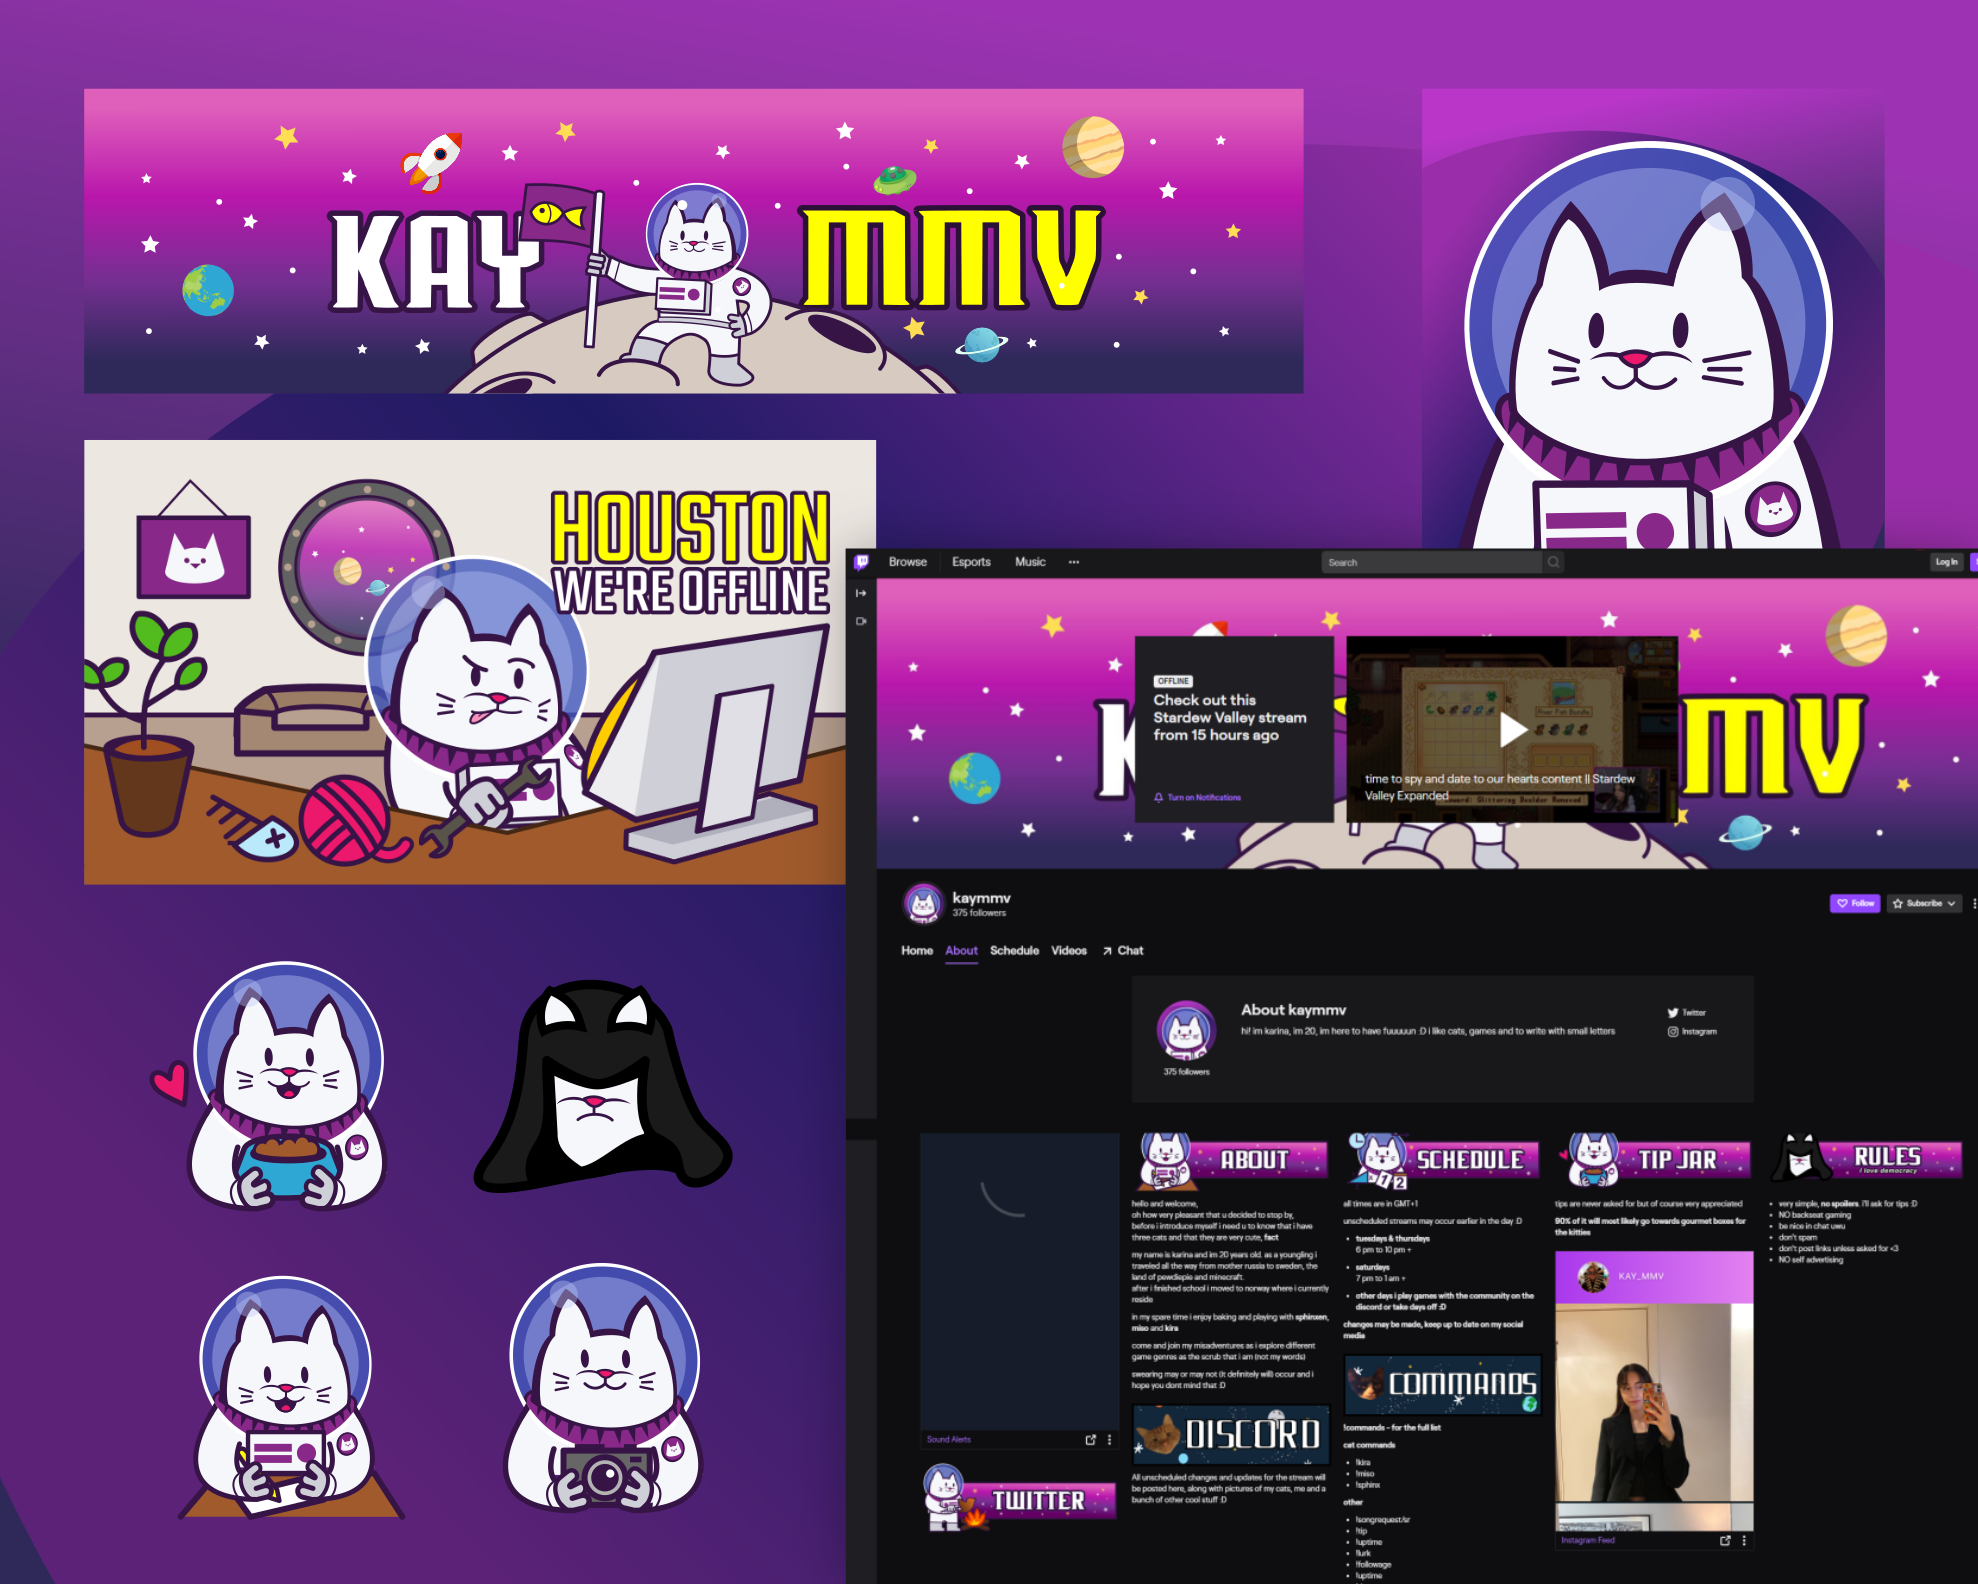 Twitch graphics for kayMMV. Designed by Johnery